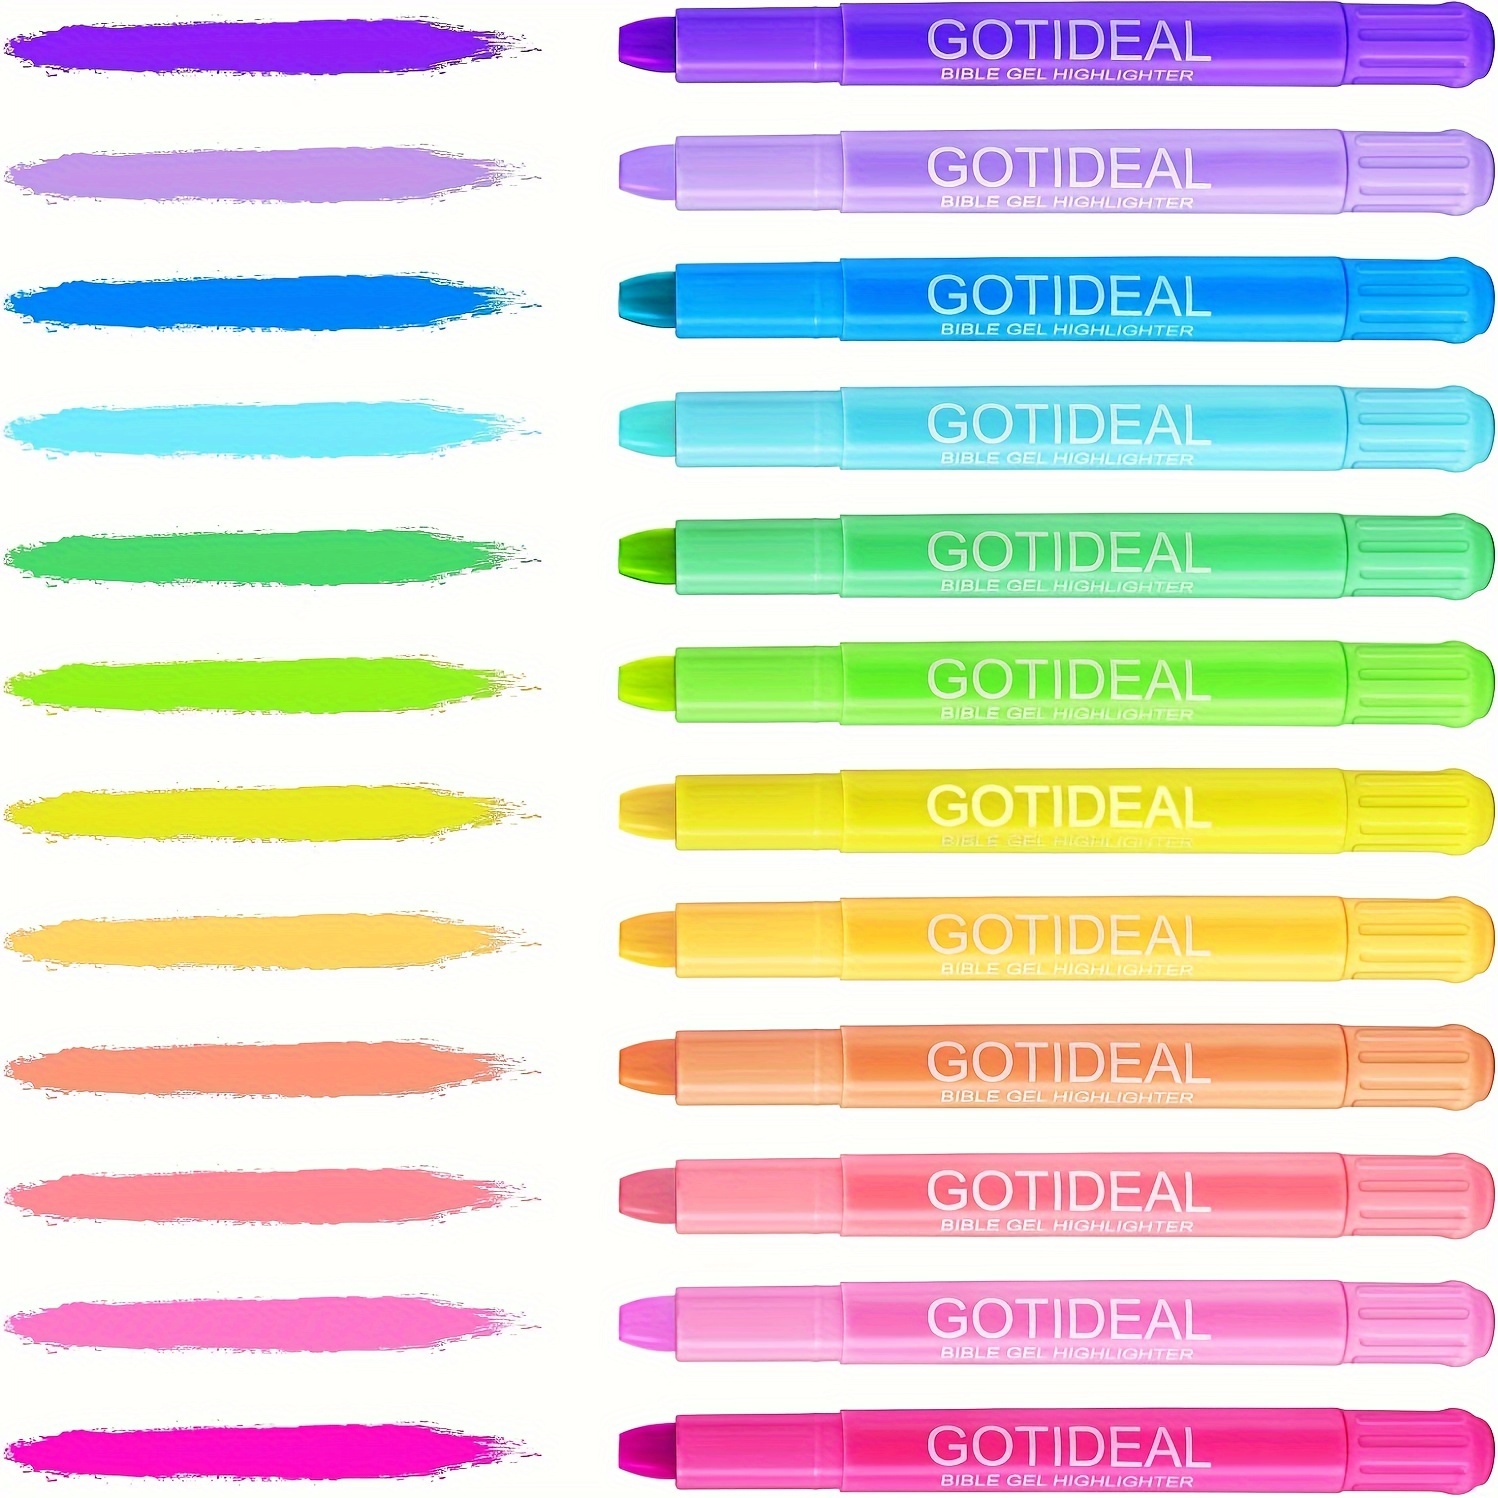 Mr. Pen- No Bleed Gel Highlighter, 16 Pcs (8 Pastel Colors and 8